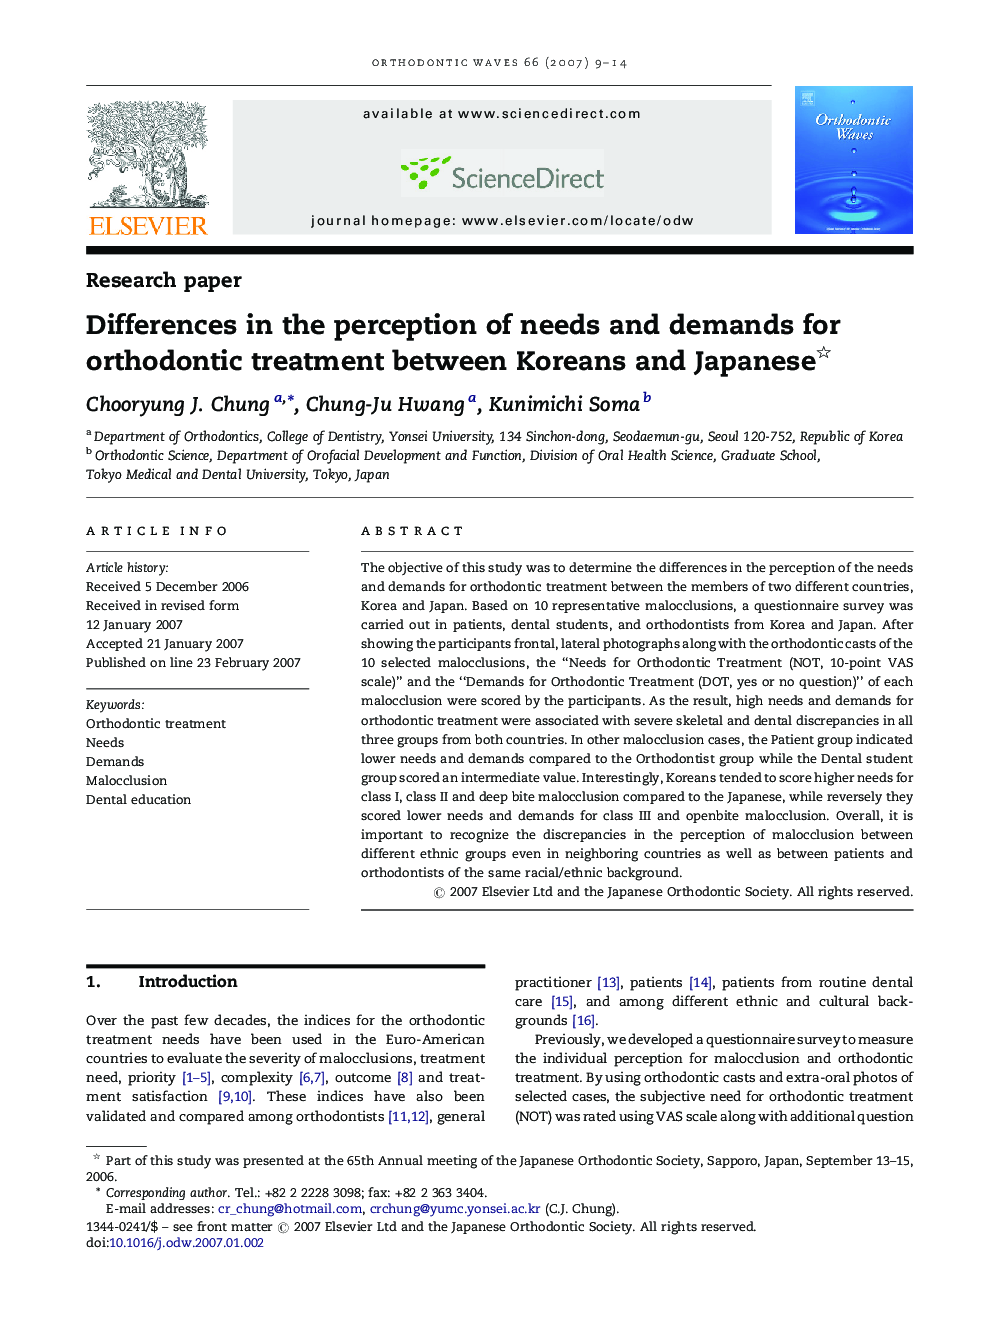 Differences in the perception of needs and demands for orthodontic treatment between Koreans and Japanese